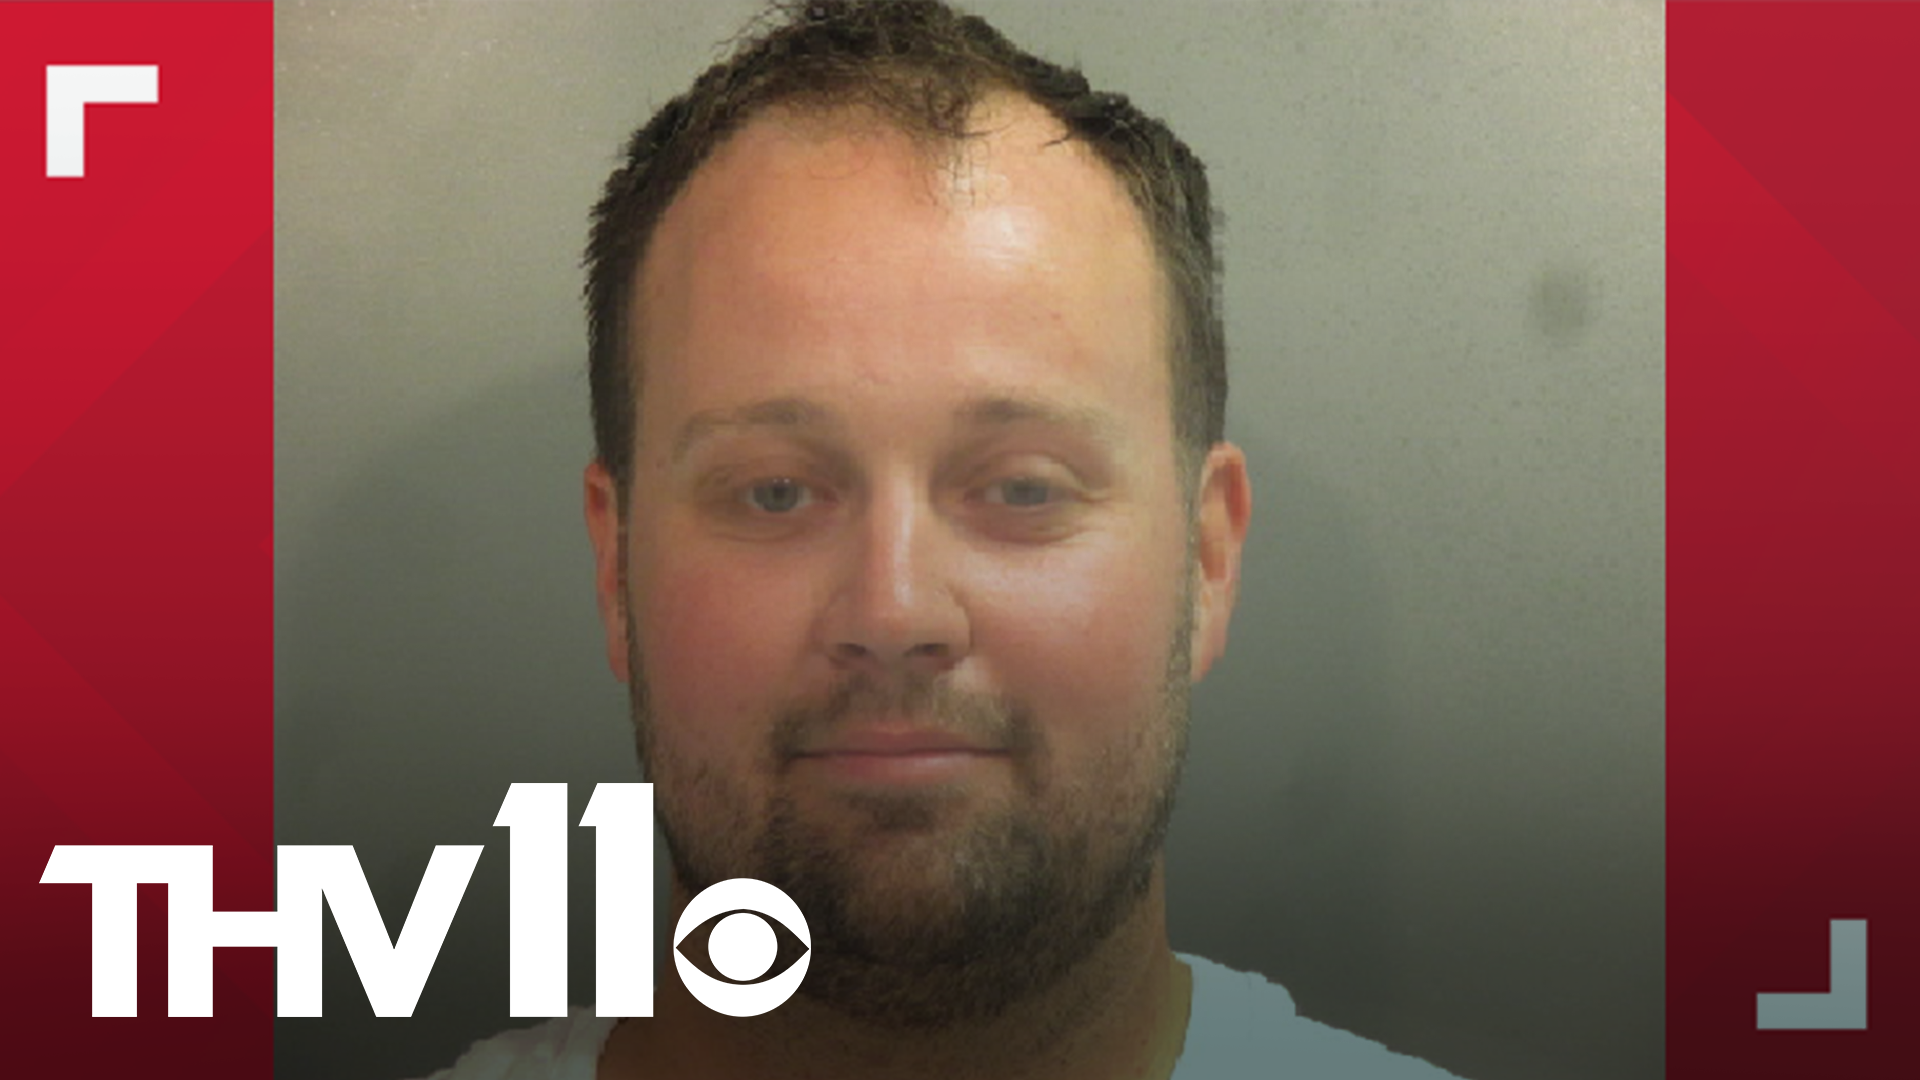 33-year-old Josh Duggar, known for his appearance on "19 Kids and Counting" was arrested Thursday, April 29 and is being held without bail.